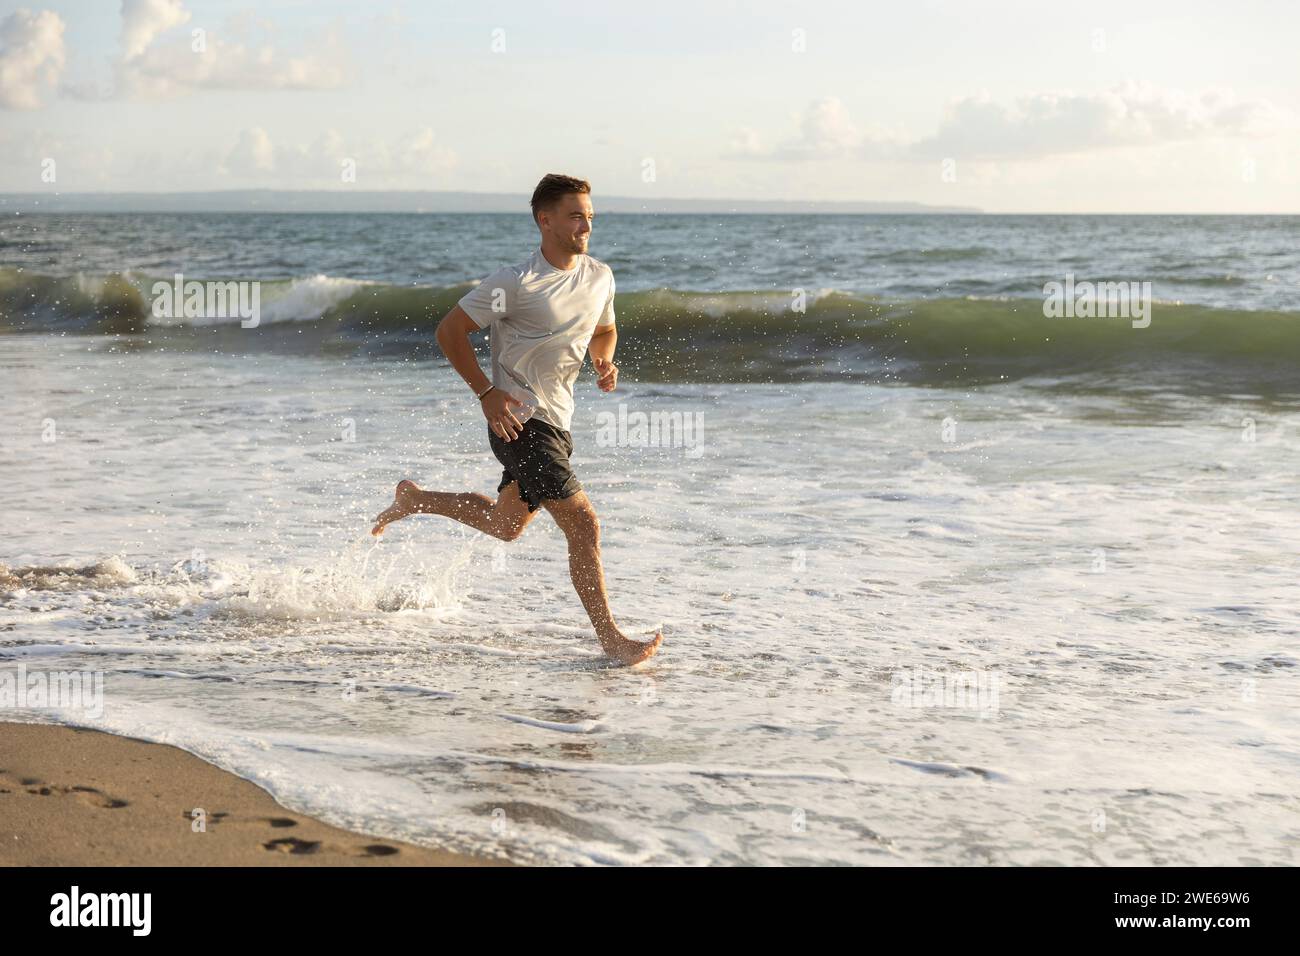 Smiling young man running in water at beach Stock Photo